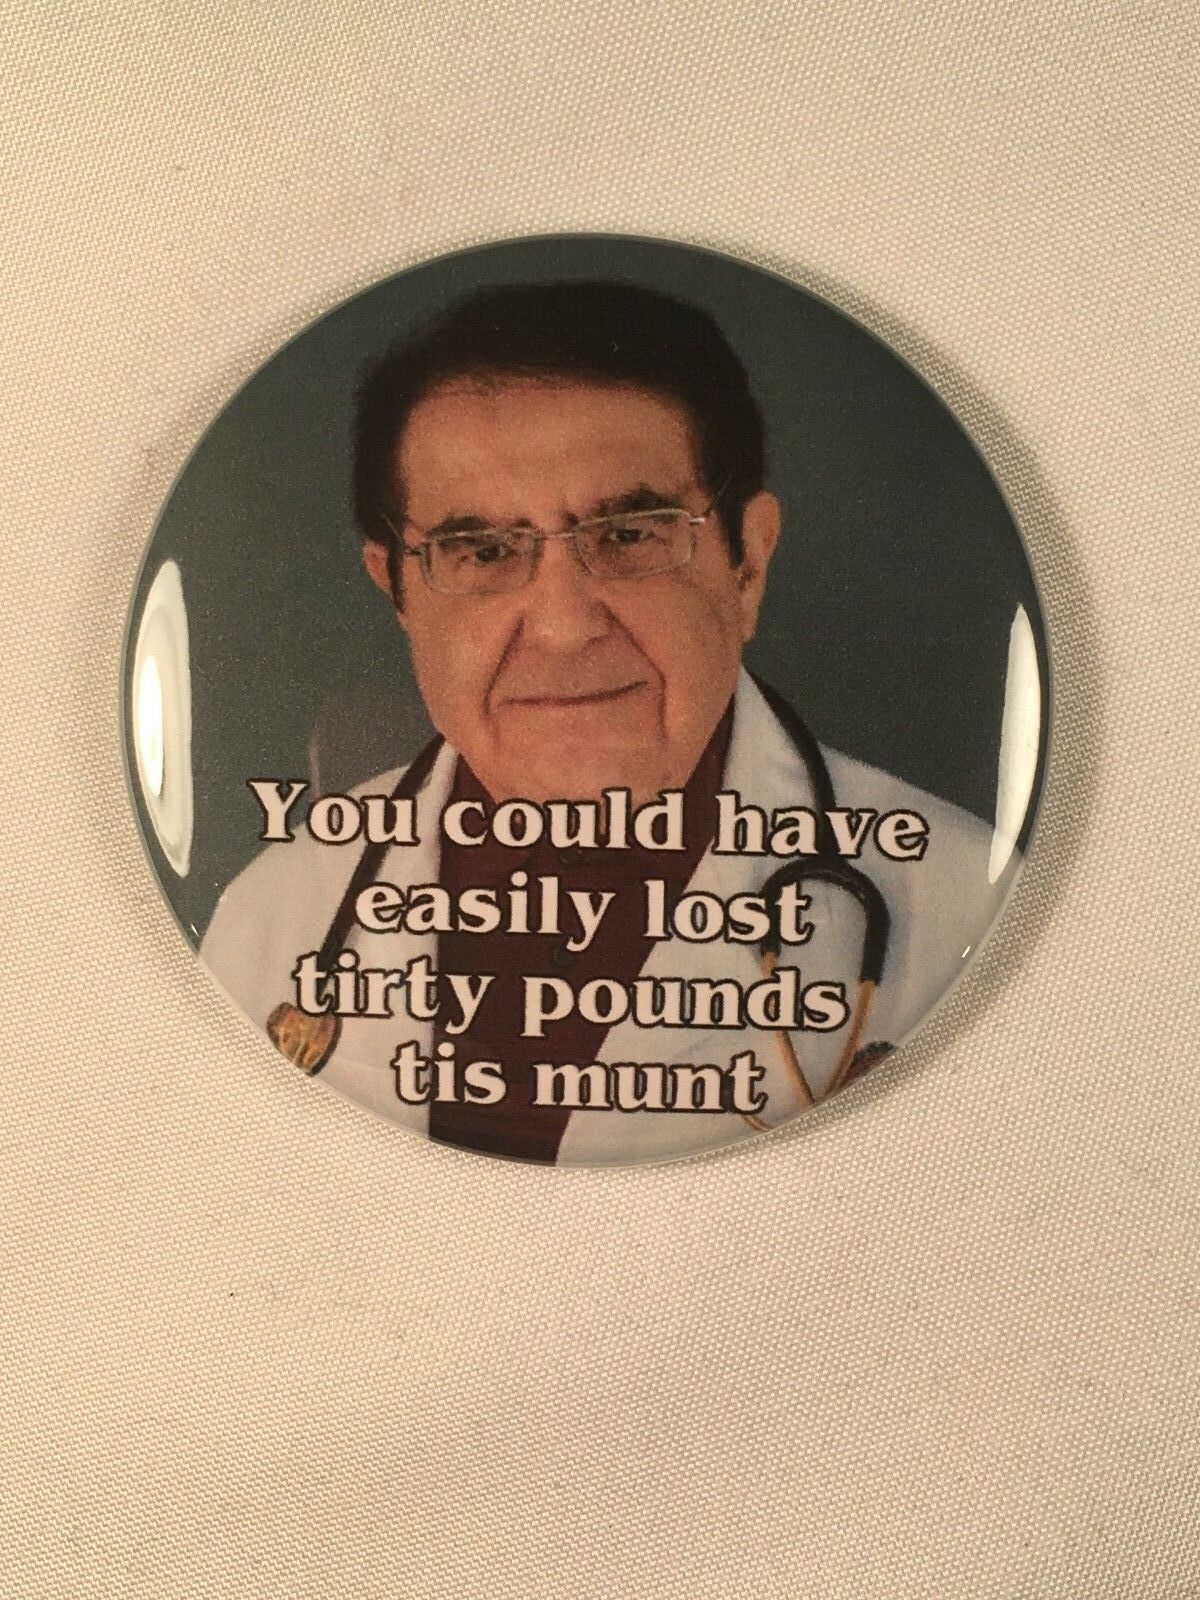 My 600 lb. Life Dr. Now Refrigerator Magnet - "Tirty Pounds Tis Munt"